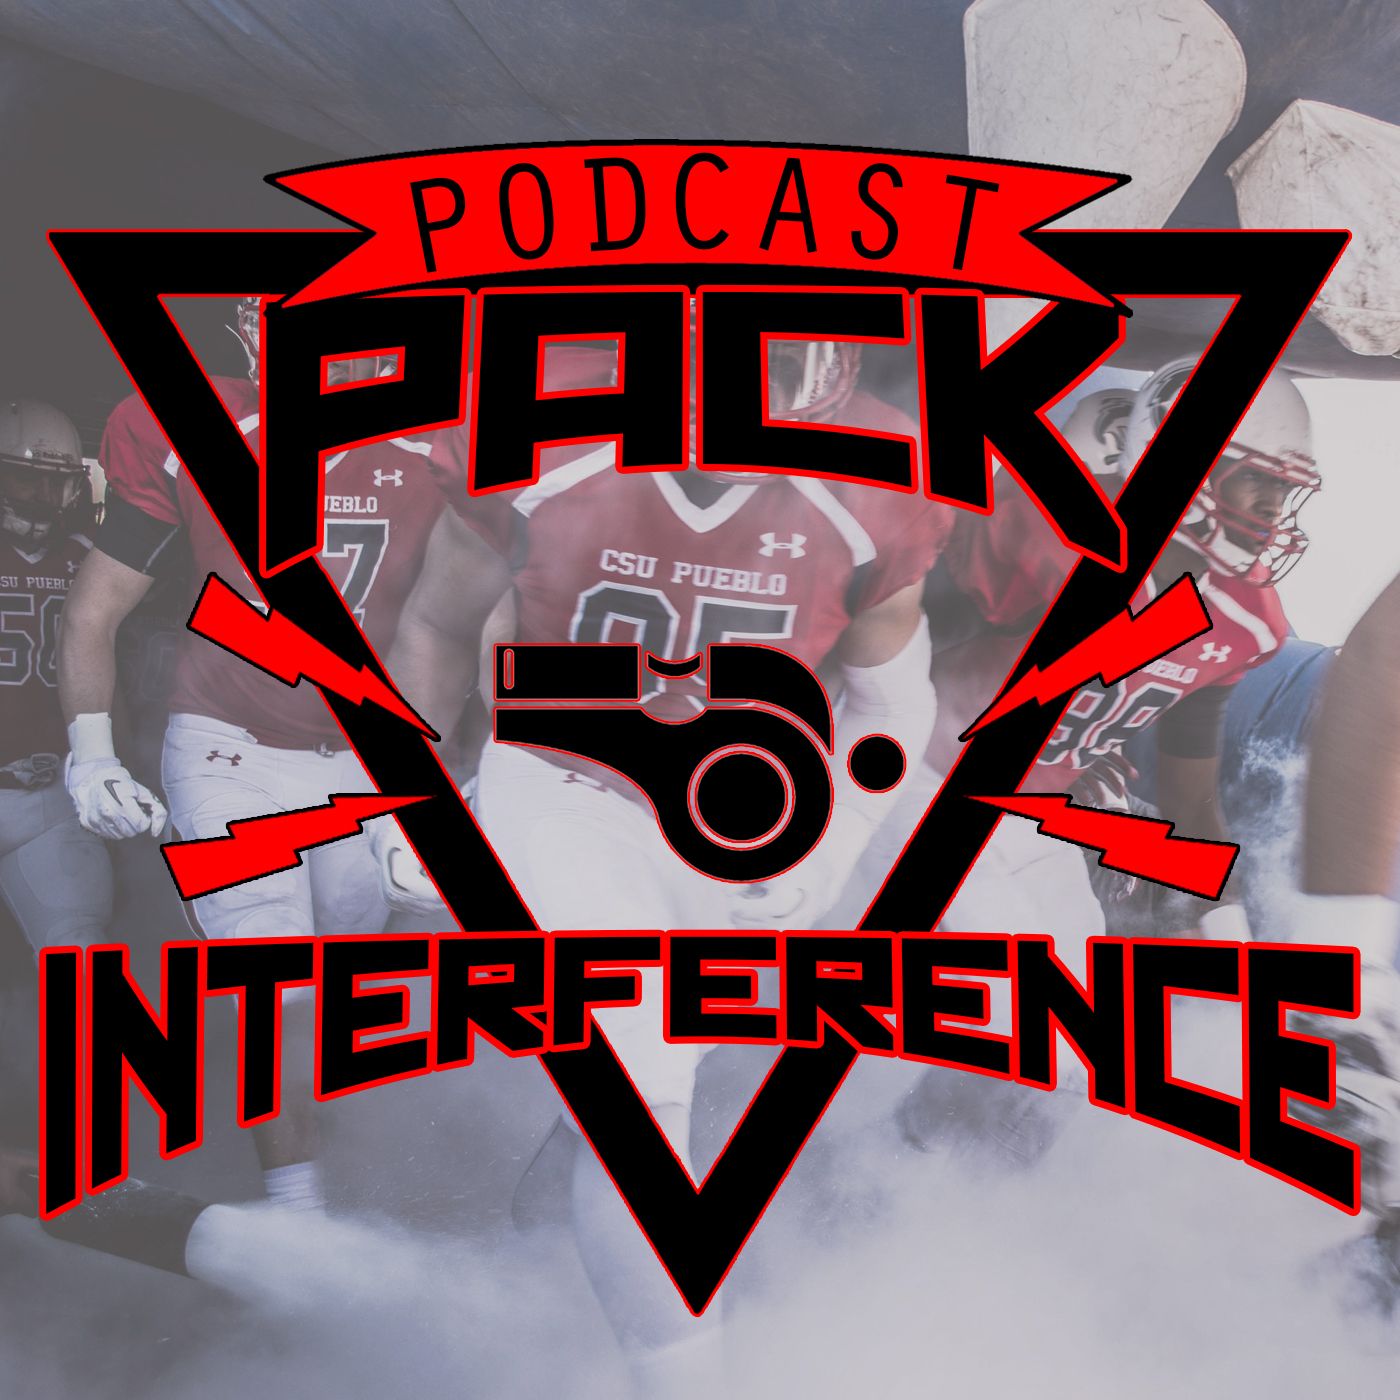 The Pack Interference Pod